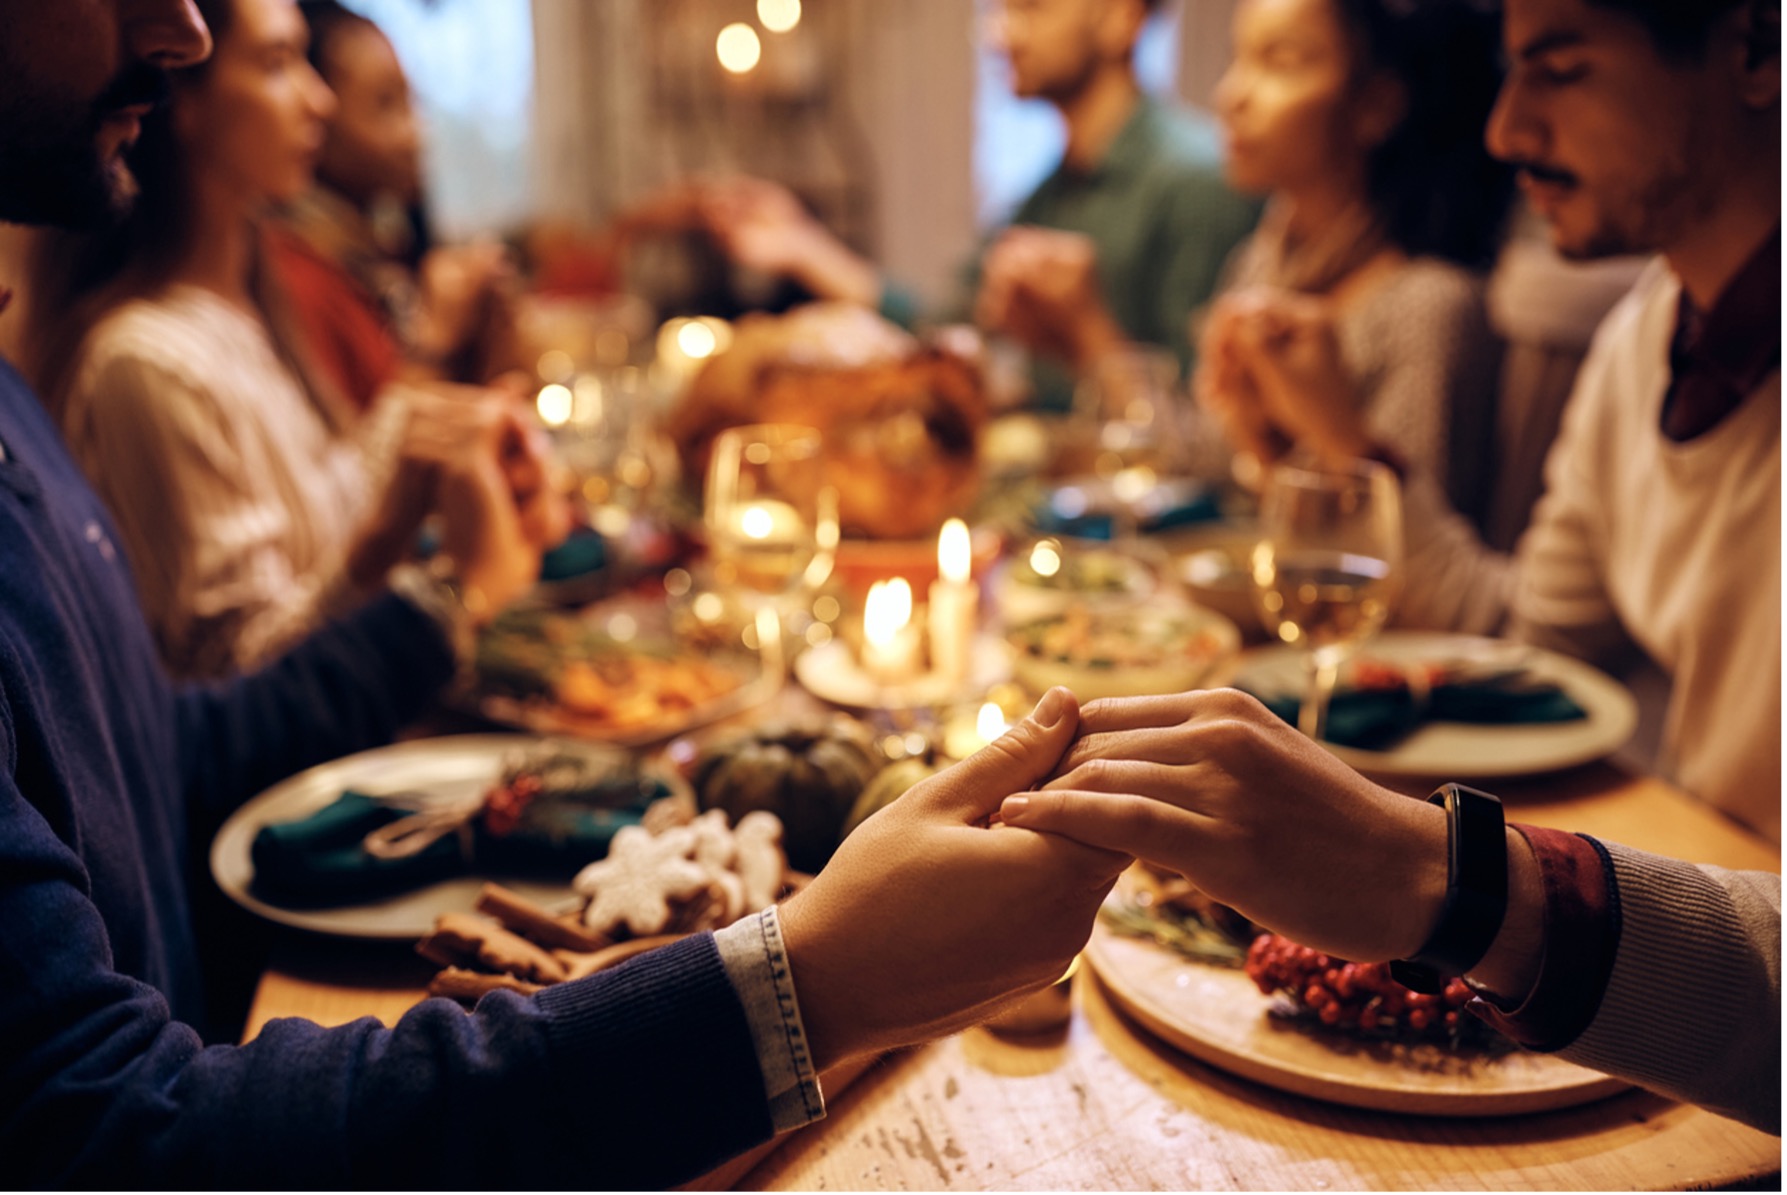 A group of people sitting around a thanksgiving table with food and candles